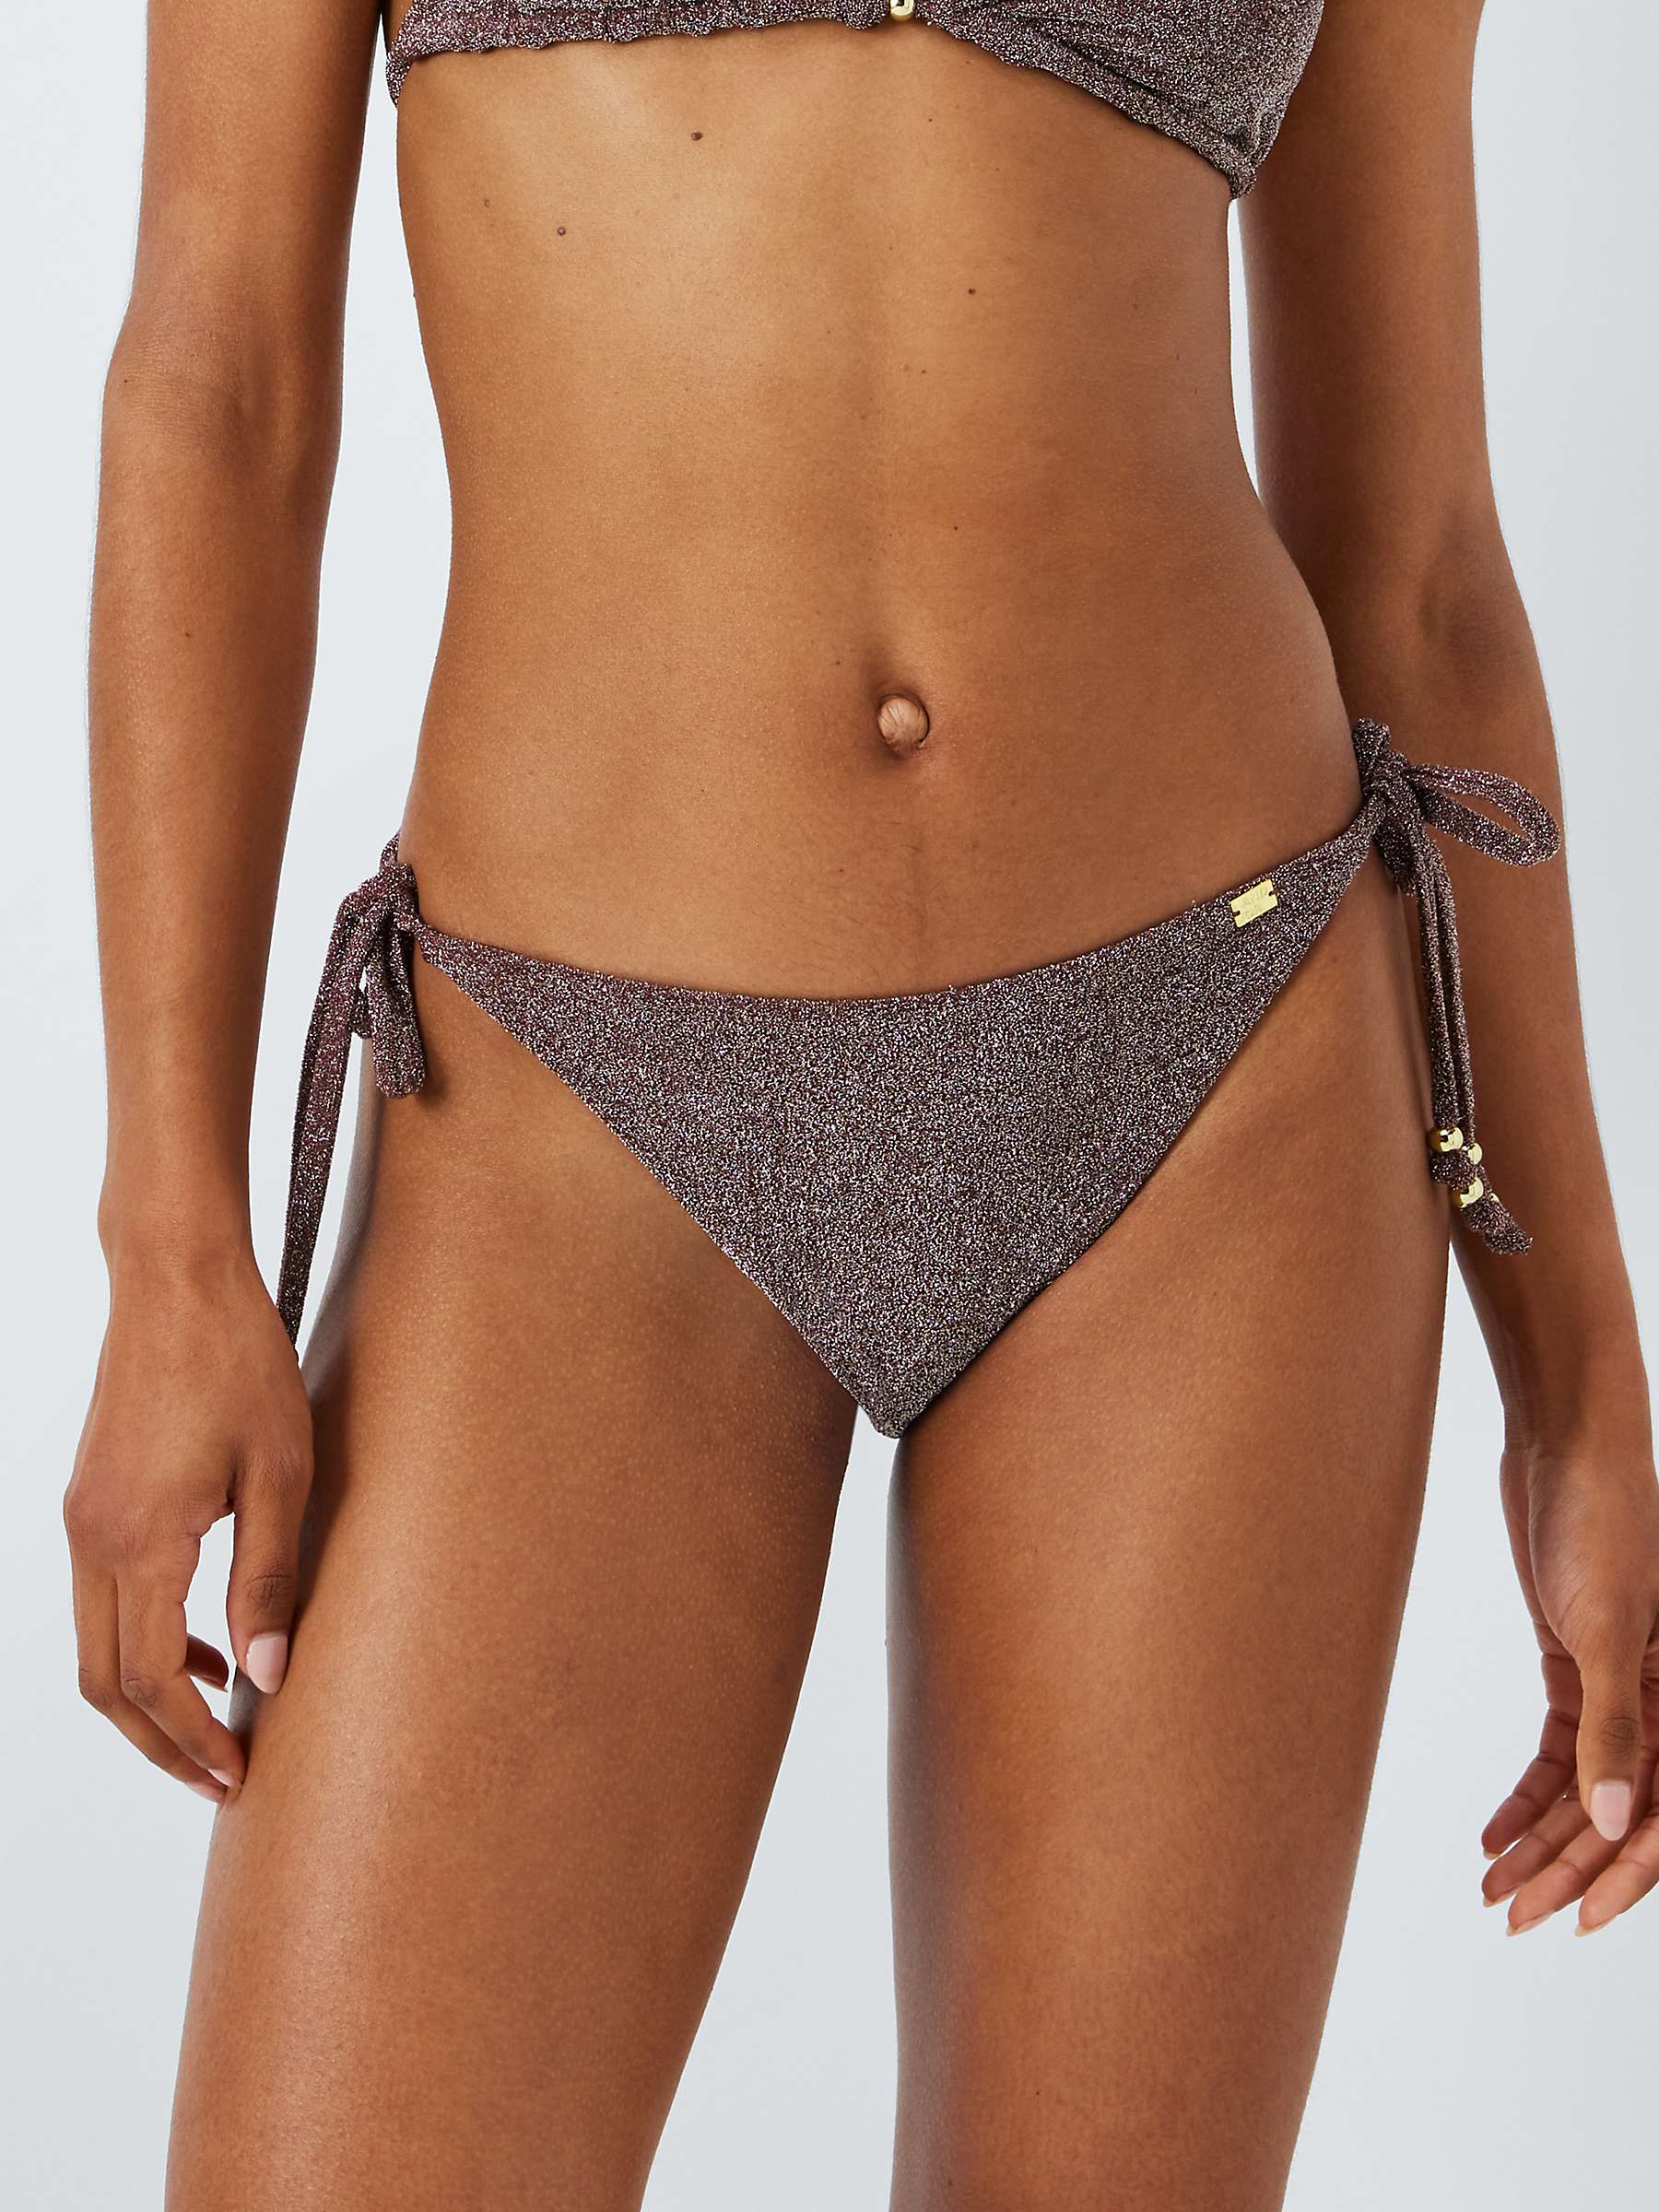 Buy AND/OR Shimmer String Bikini Bottoms, Chocolate Online at johnlewis.com